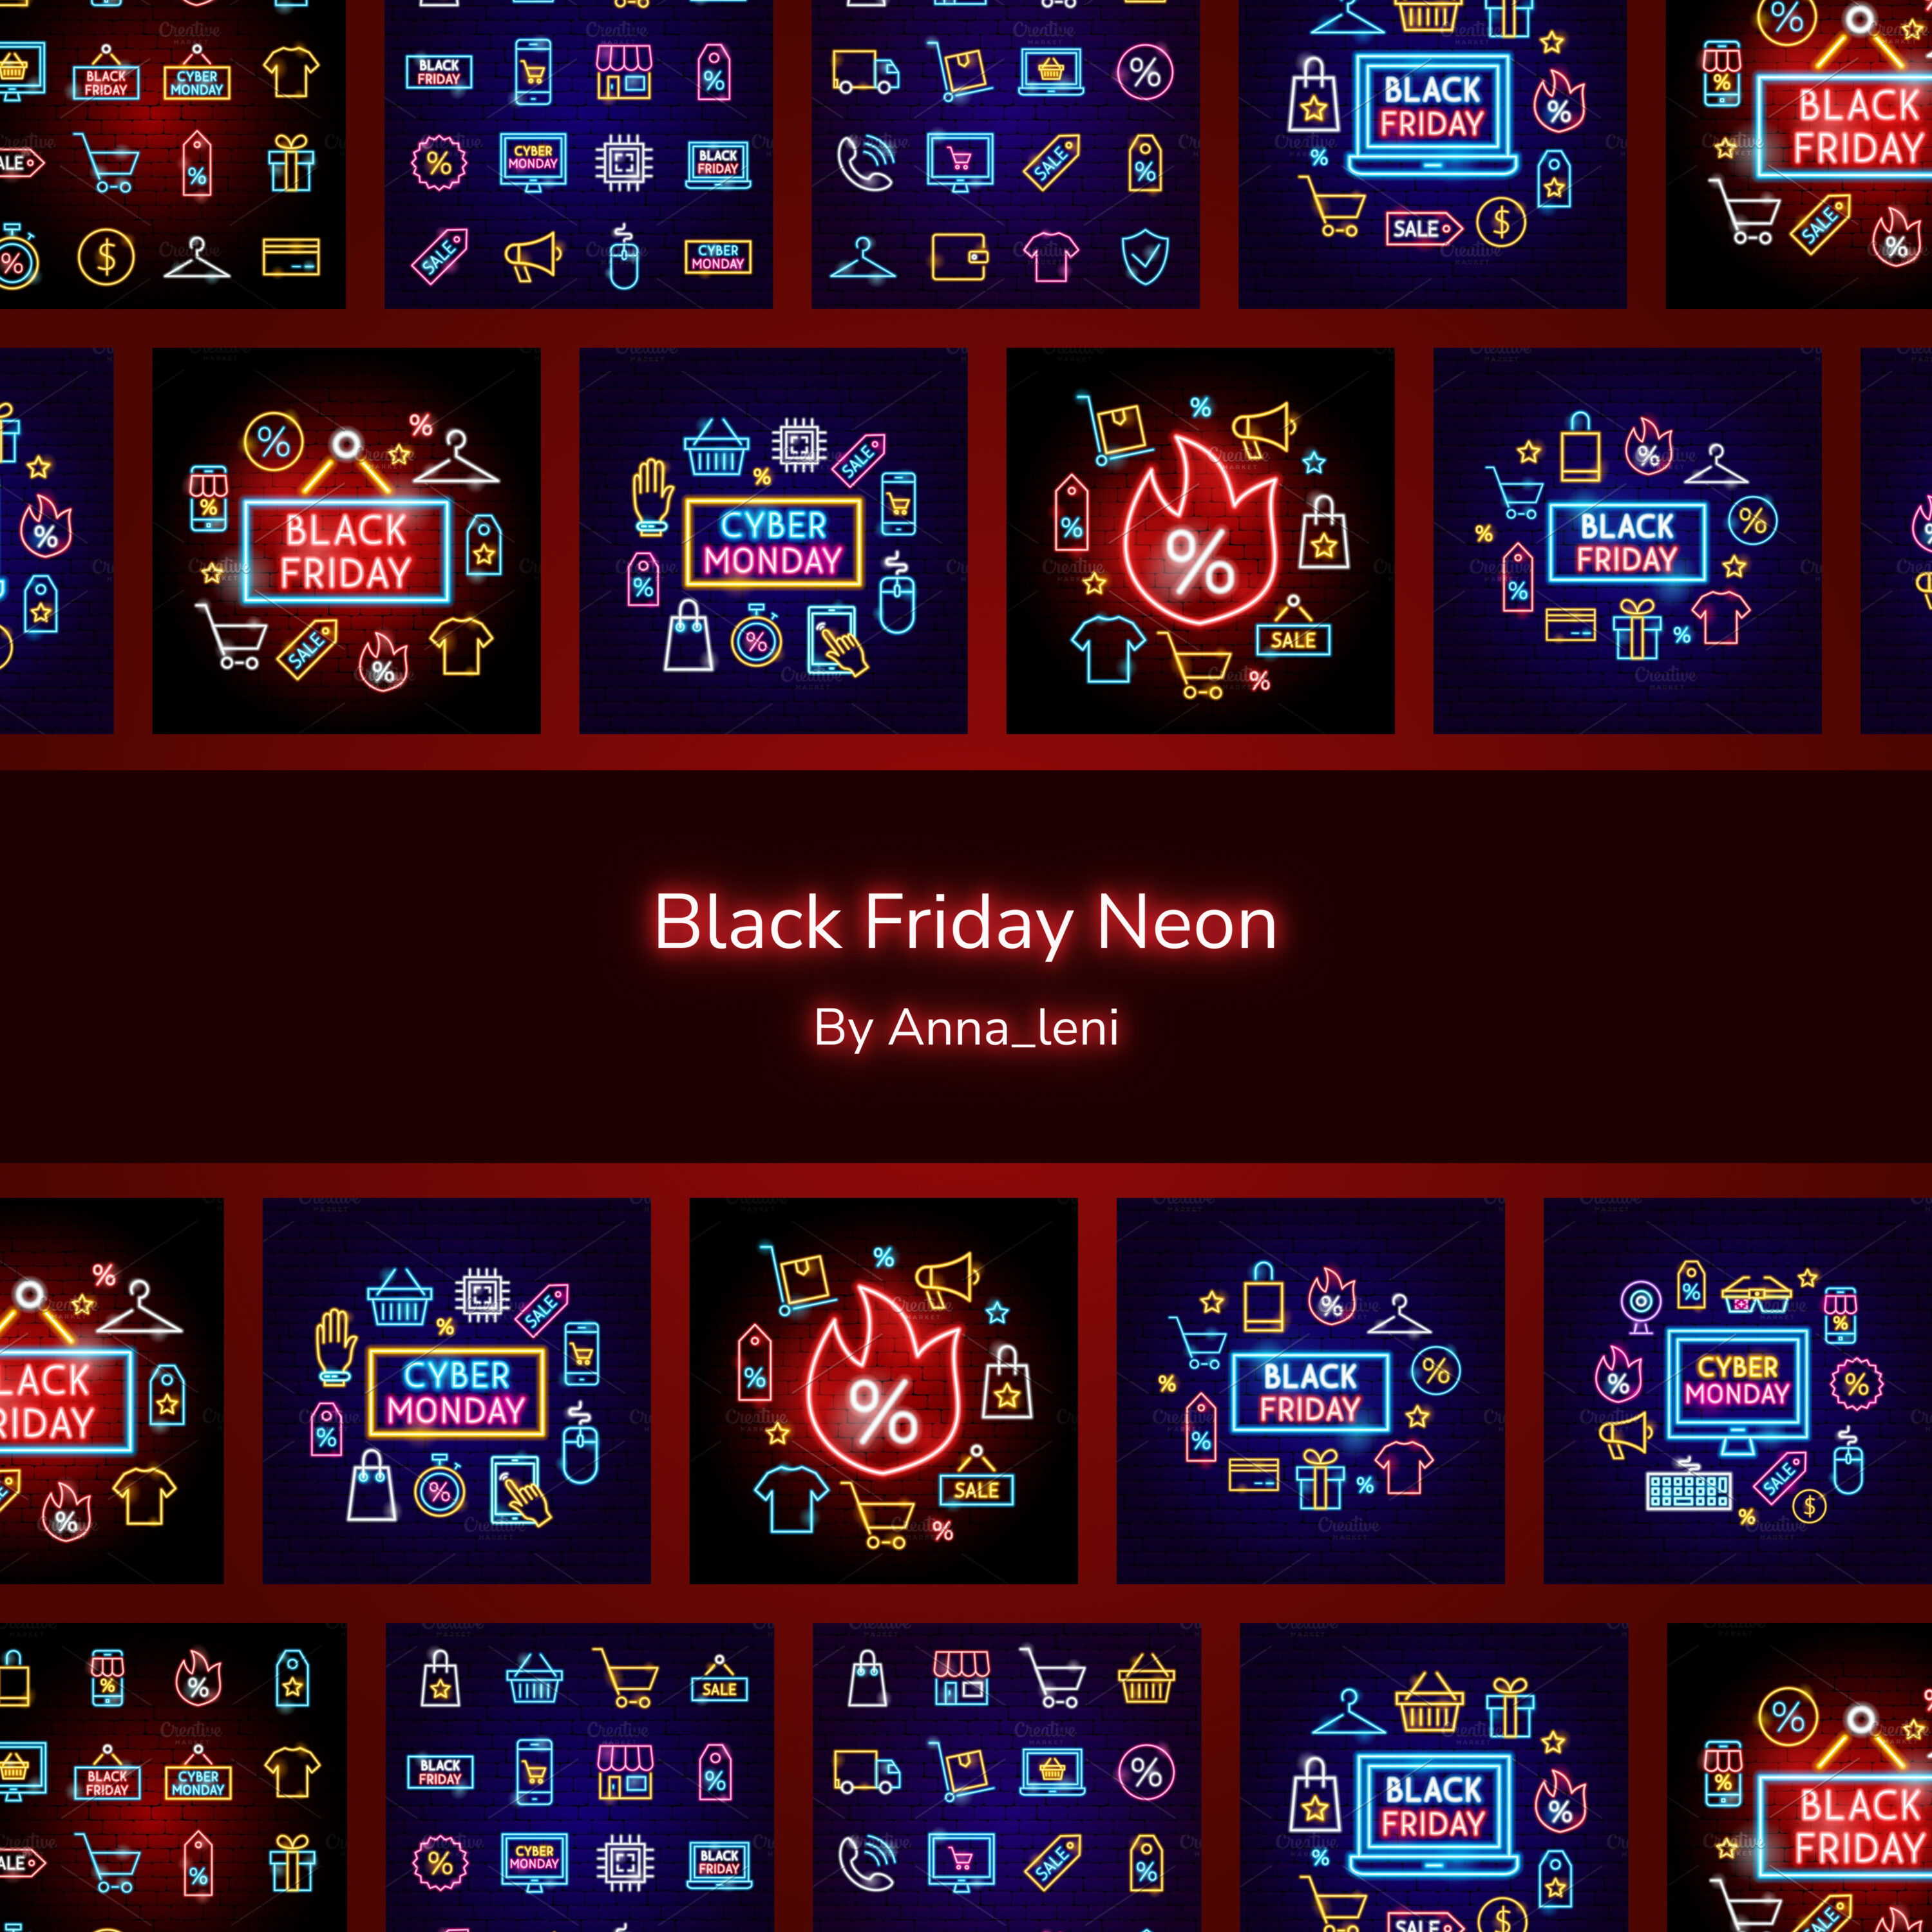 Black friday neon image preview.